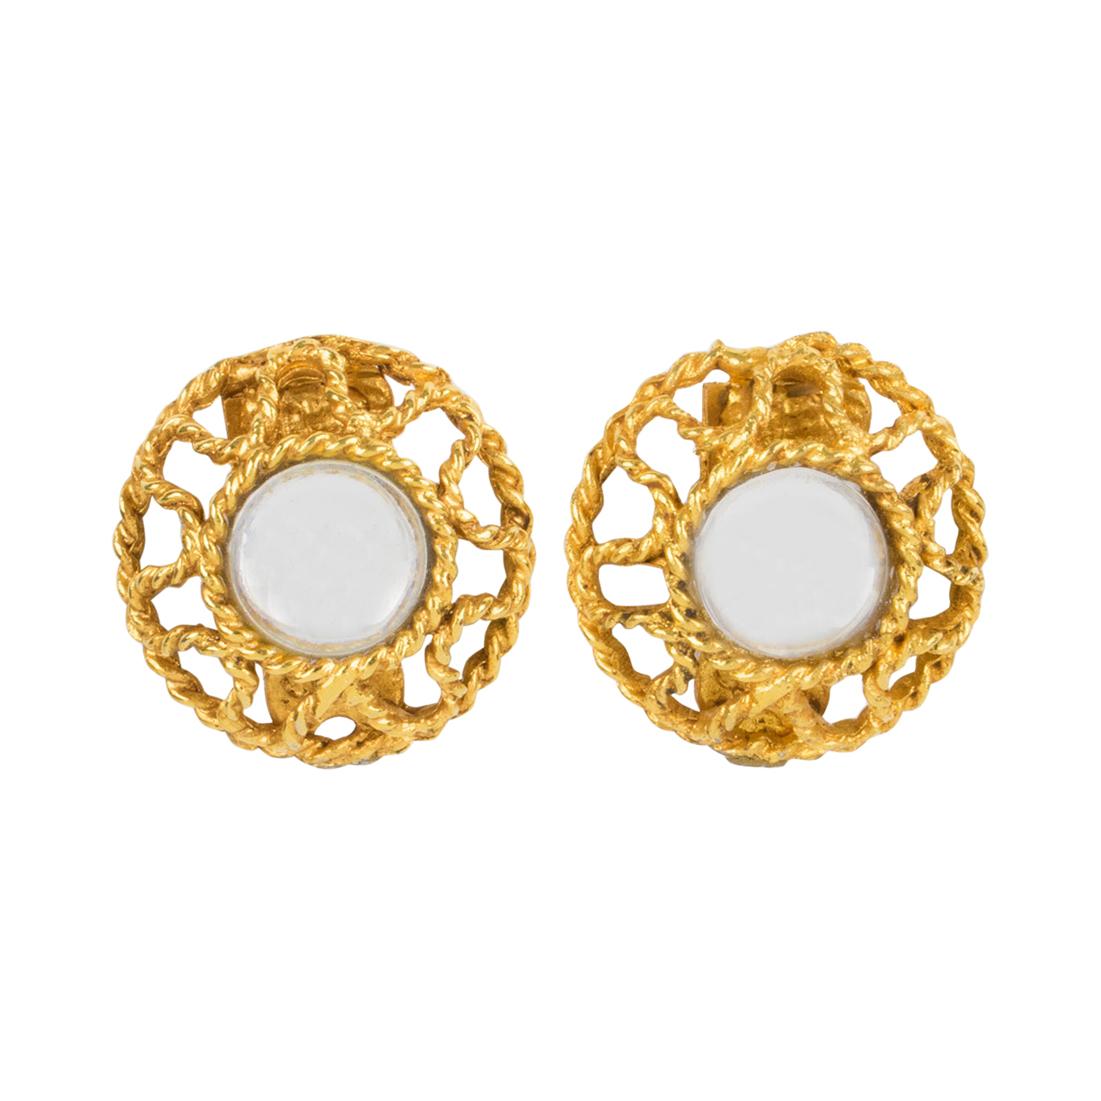  Alexis Lahellec Paris Clip Earrings Gilt Metal with Mirrored Glass Cabochons For Sale